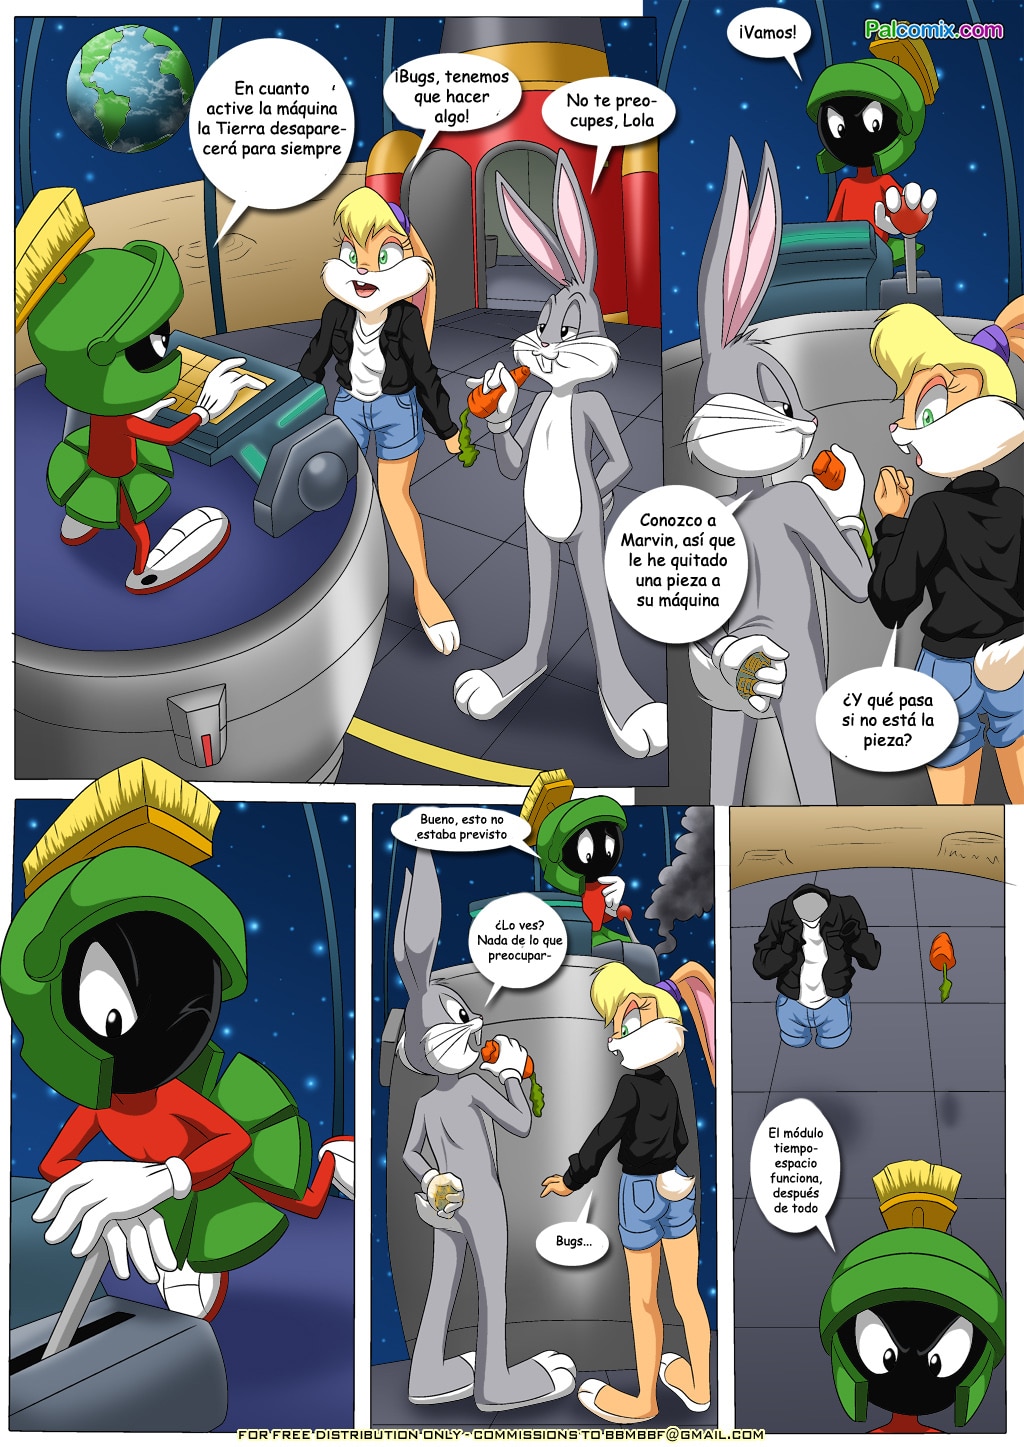 [Palcomix] Time Crossed Bunnies #2 - 1